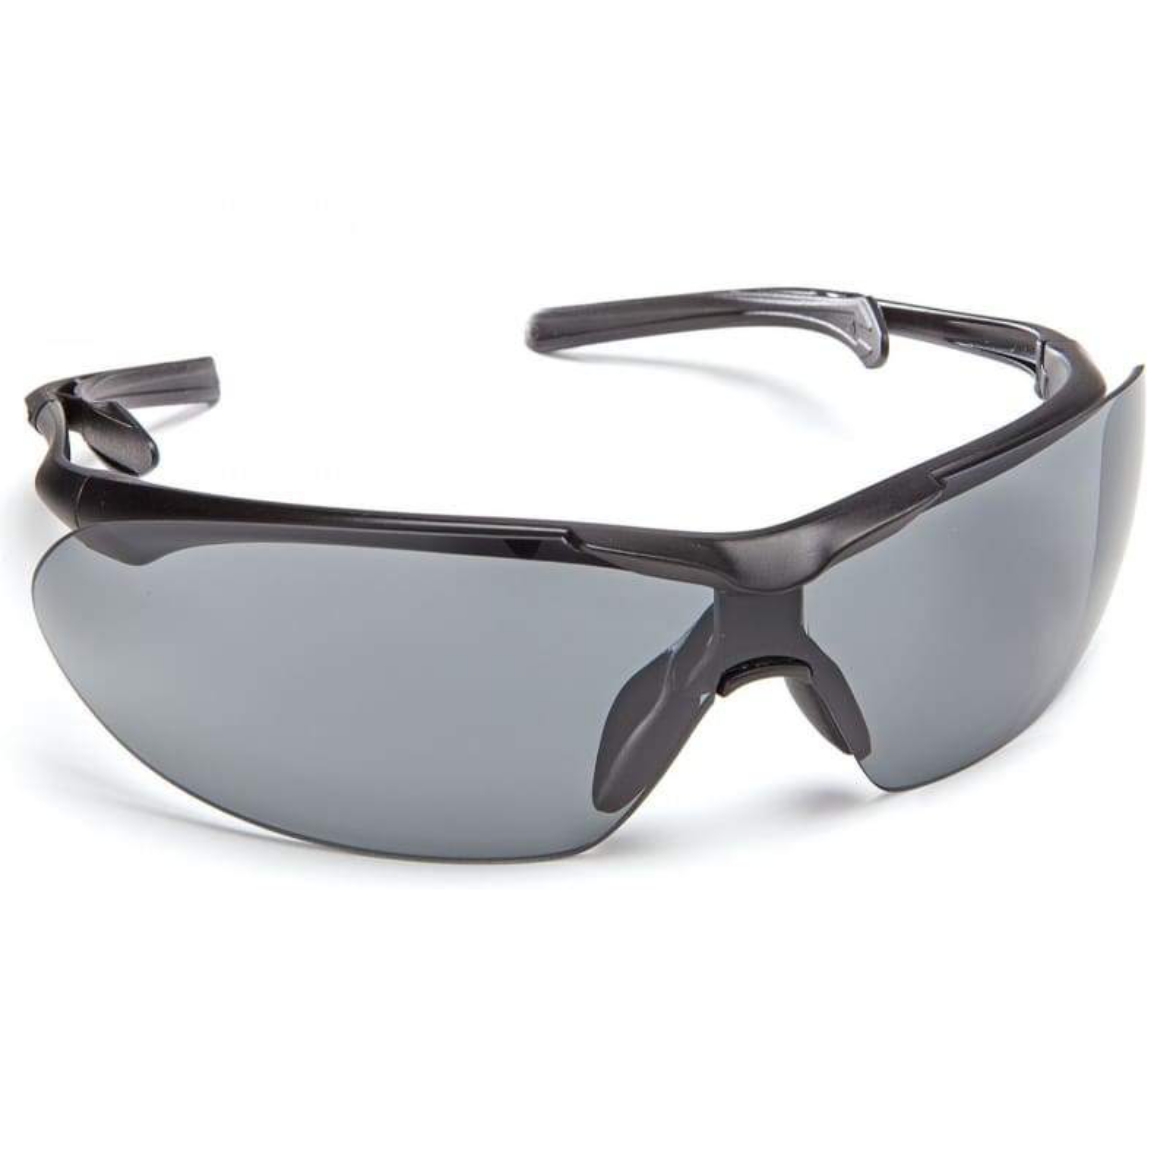 Picture of Force360 Eyefit Smoke Lens Safety Glasses